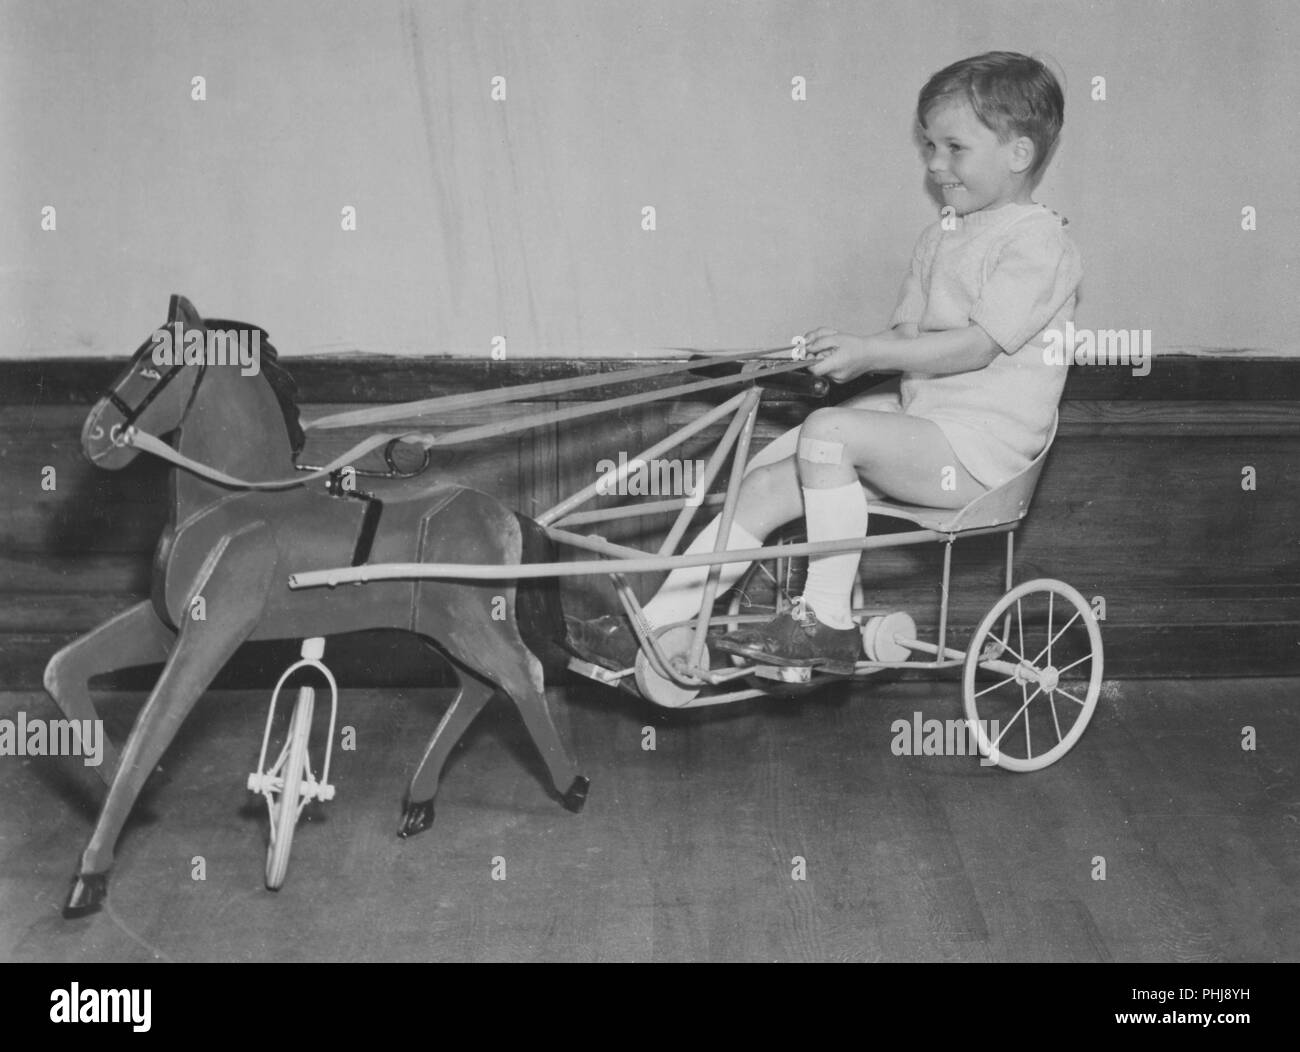 19s0s bicycle toy. A boy is trying this years favorite childrens toy, a pedal car as a horse and carrriage. Sweden 1944 Stock Photo